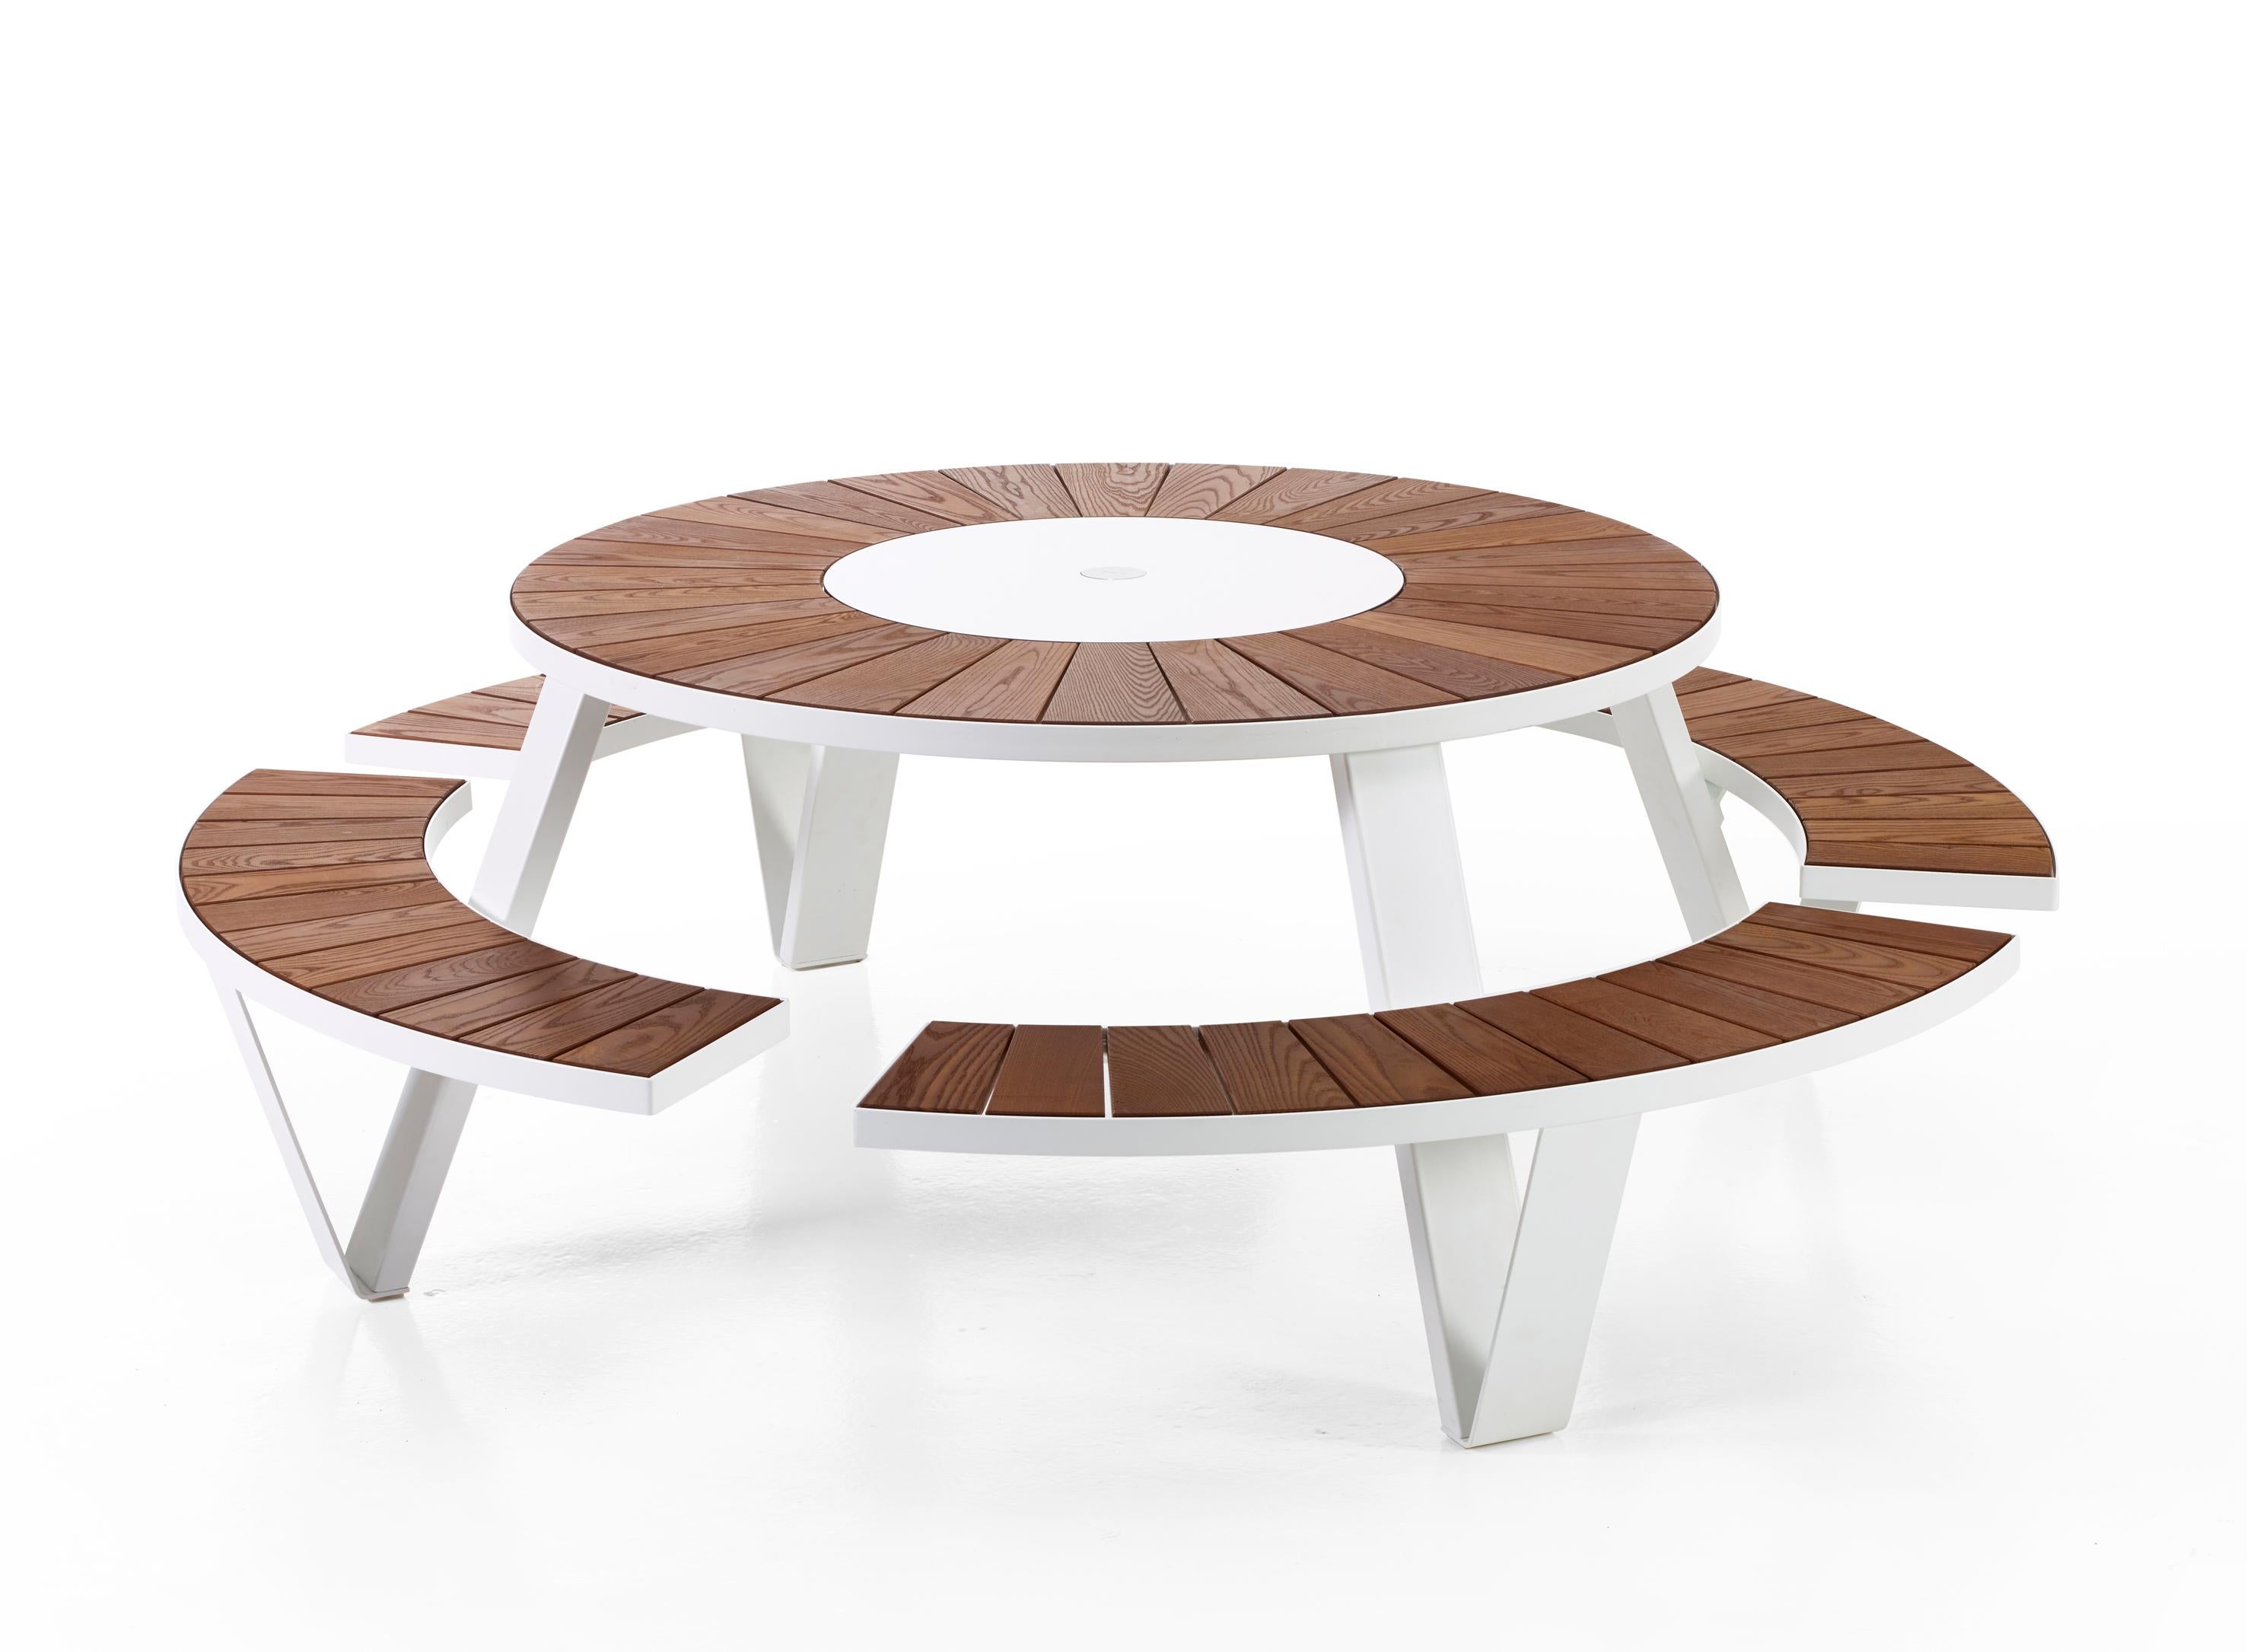 The Pantagruel round picnic table seats eight people comfortably and includes a Lazy Susan. The frame comes powder coated as well as galvanized, tabletop and seats comes in natural Iroko hardwood. Includes Inumbra Parasol that connects to the